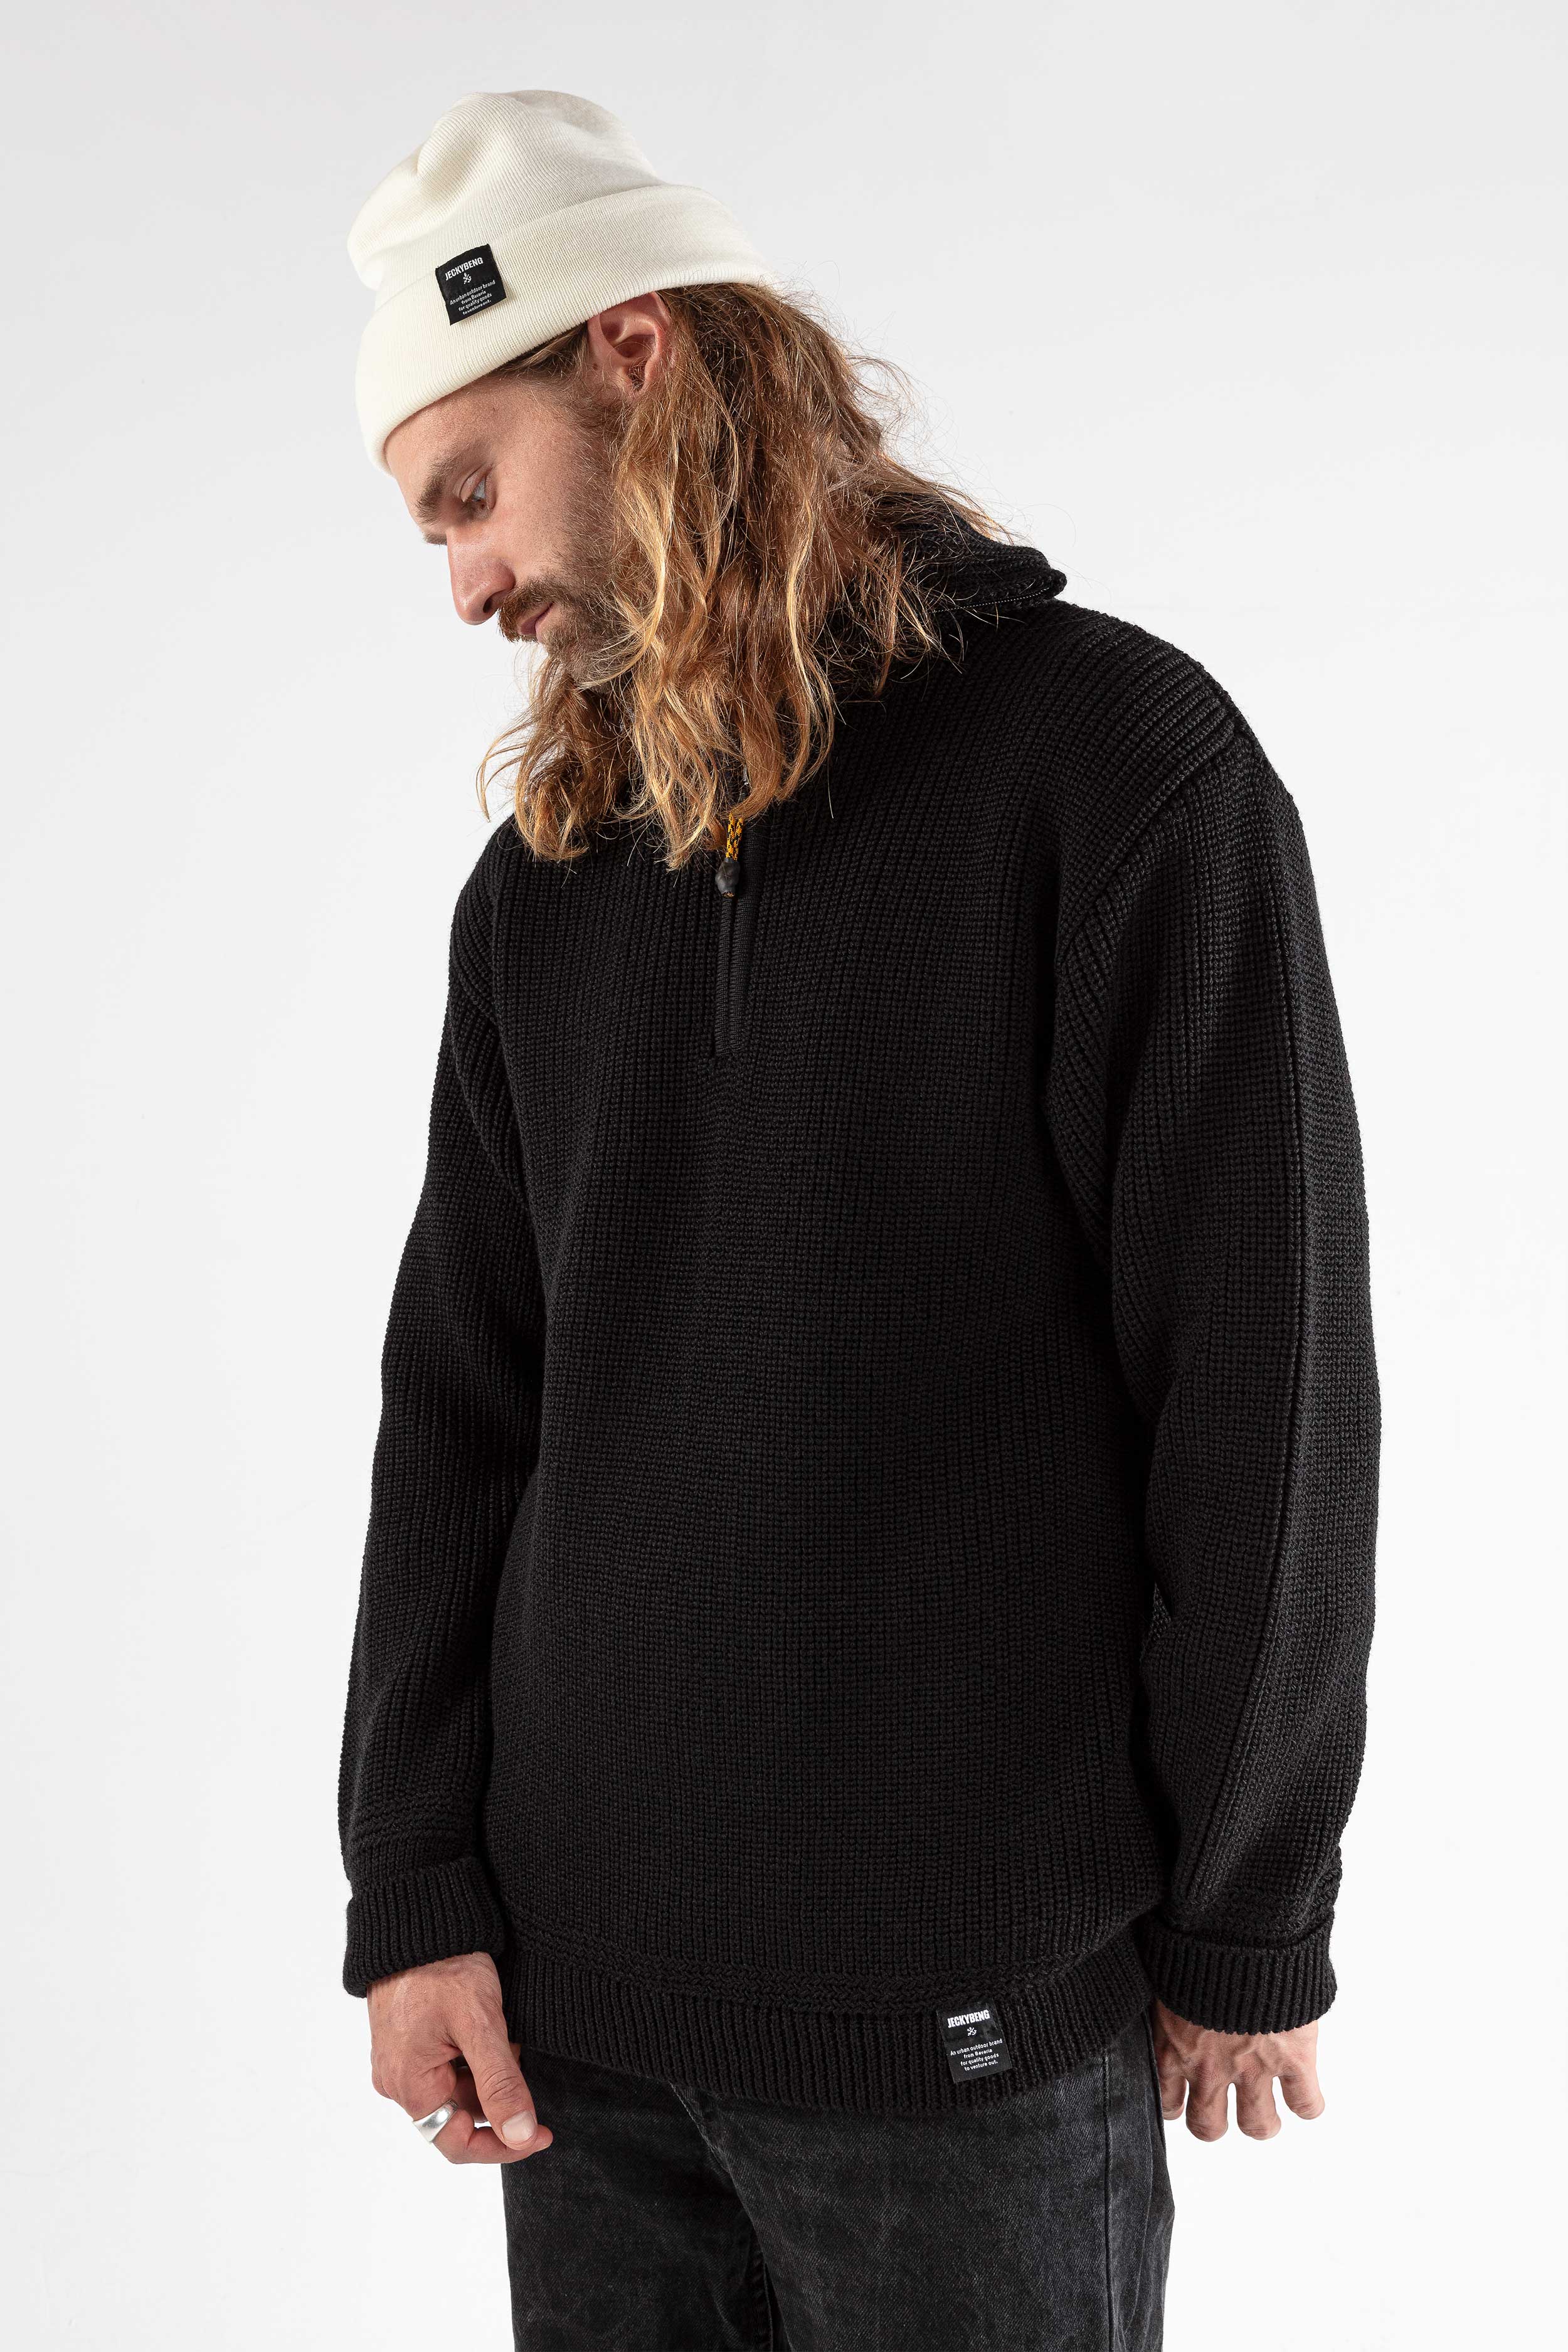 JECKYBENG-The-MERINO-TROYER-09 black